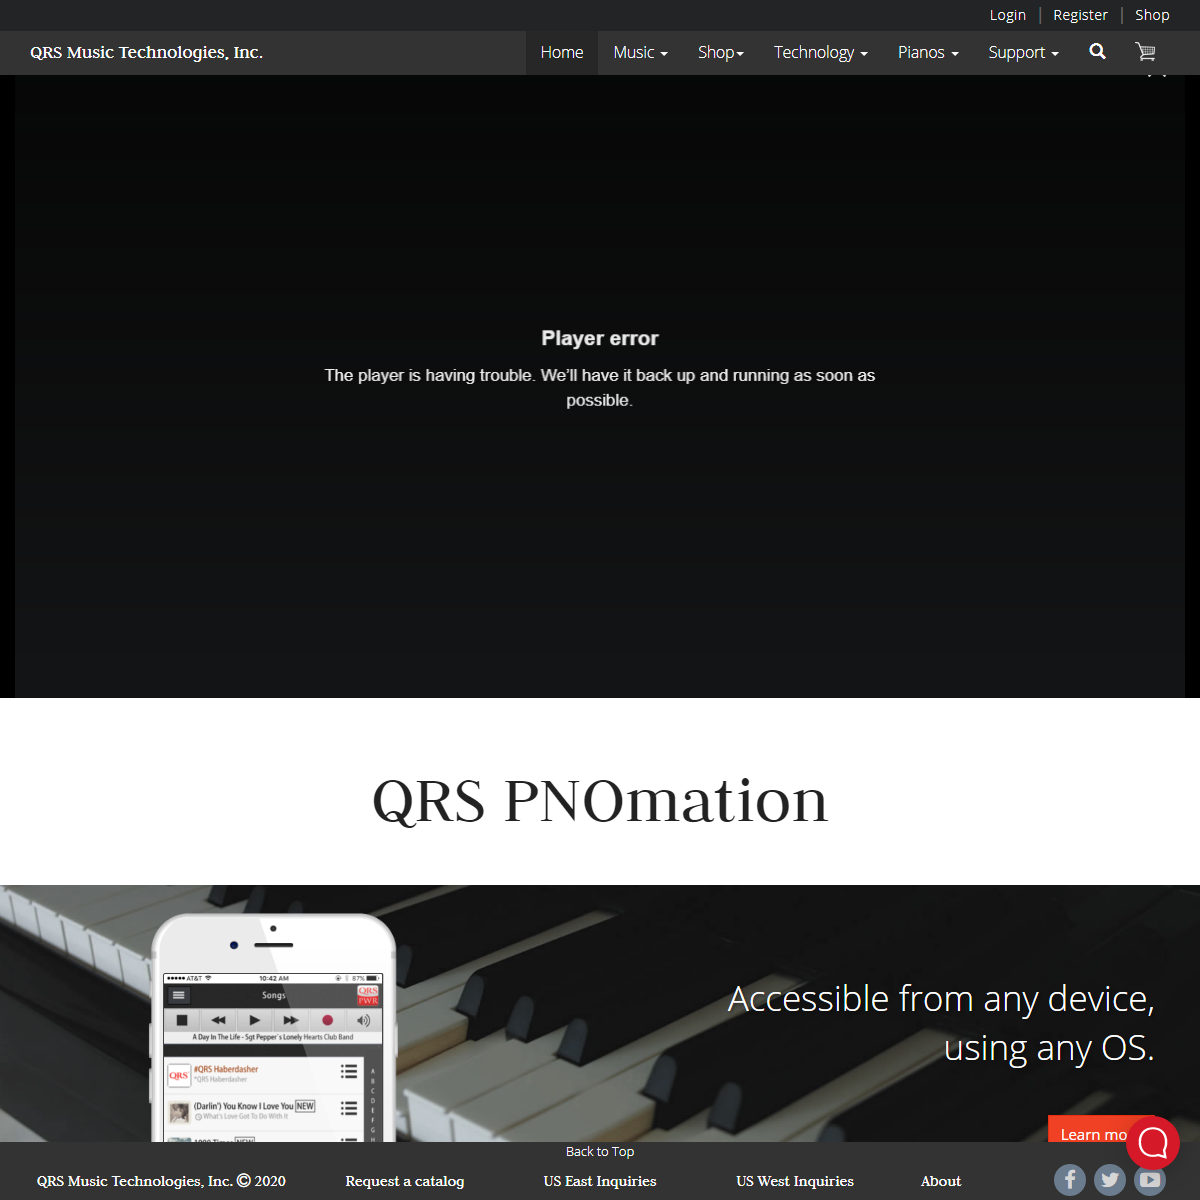 A complete backup of http://www.qrsmusic.com/